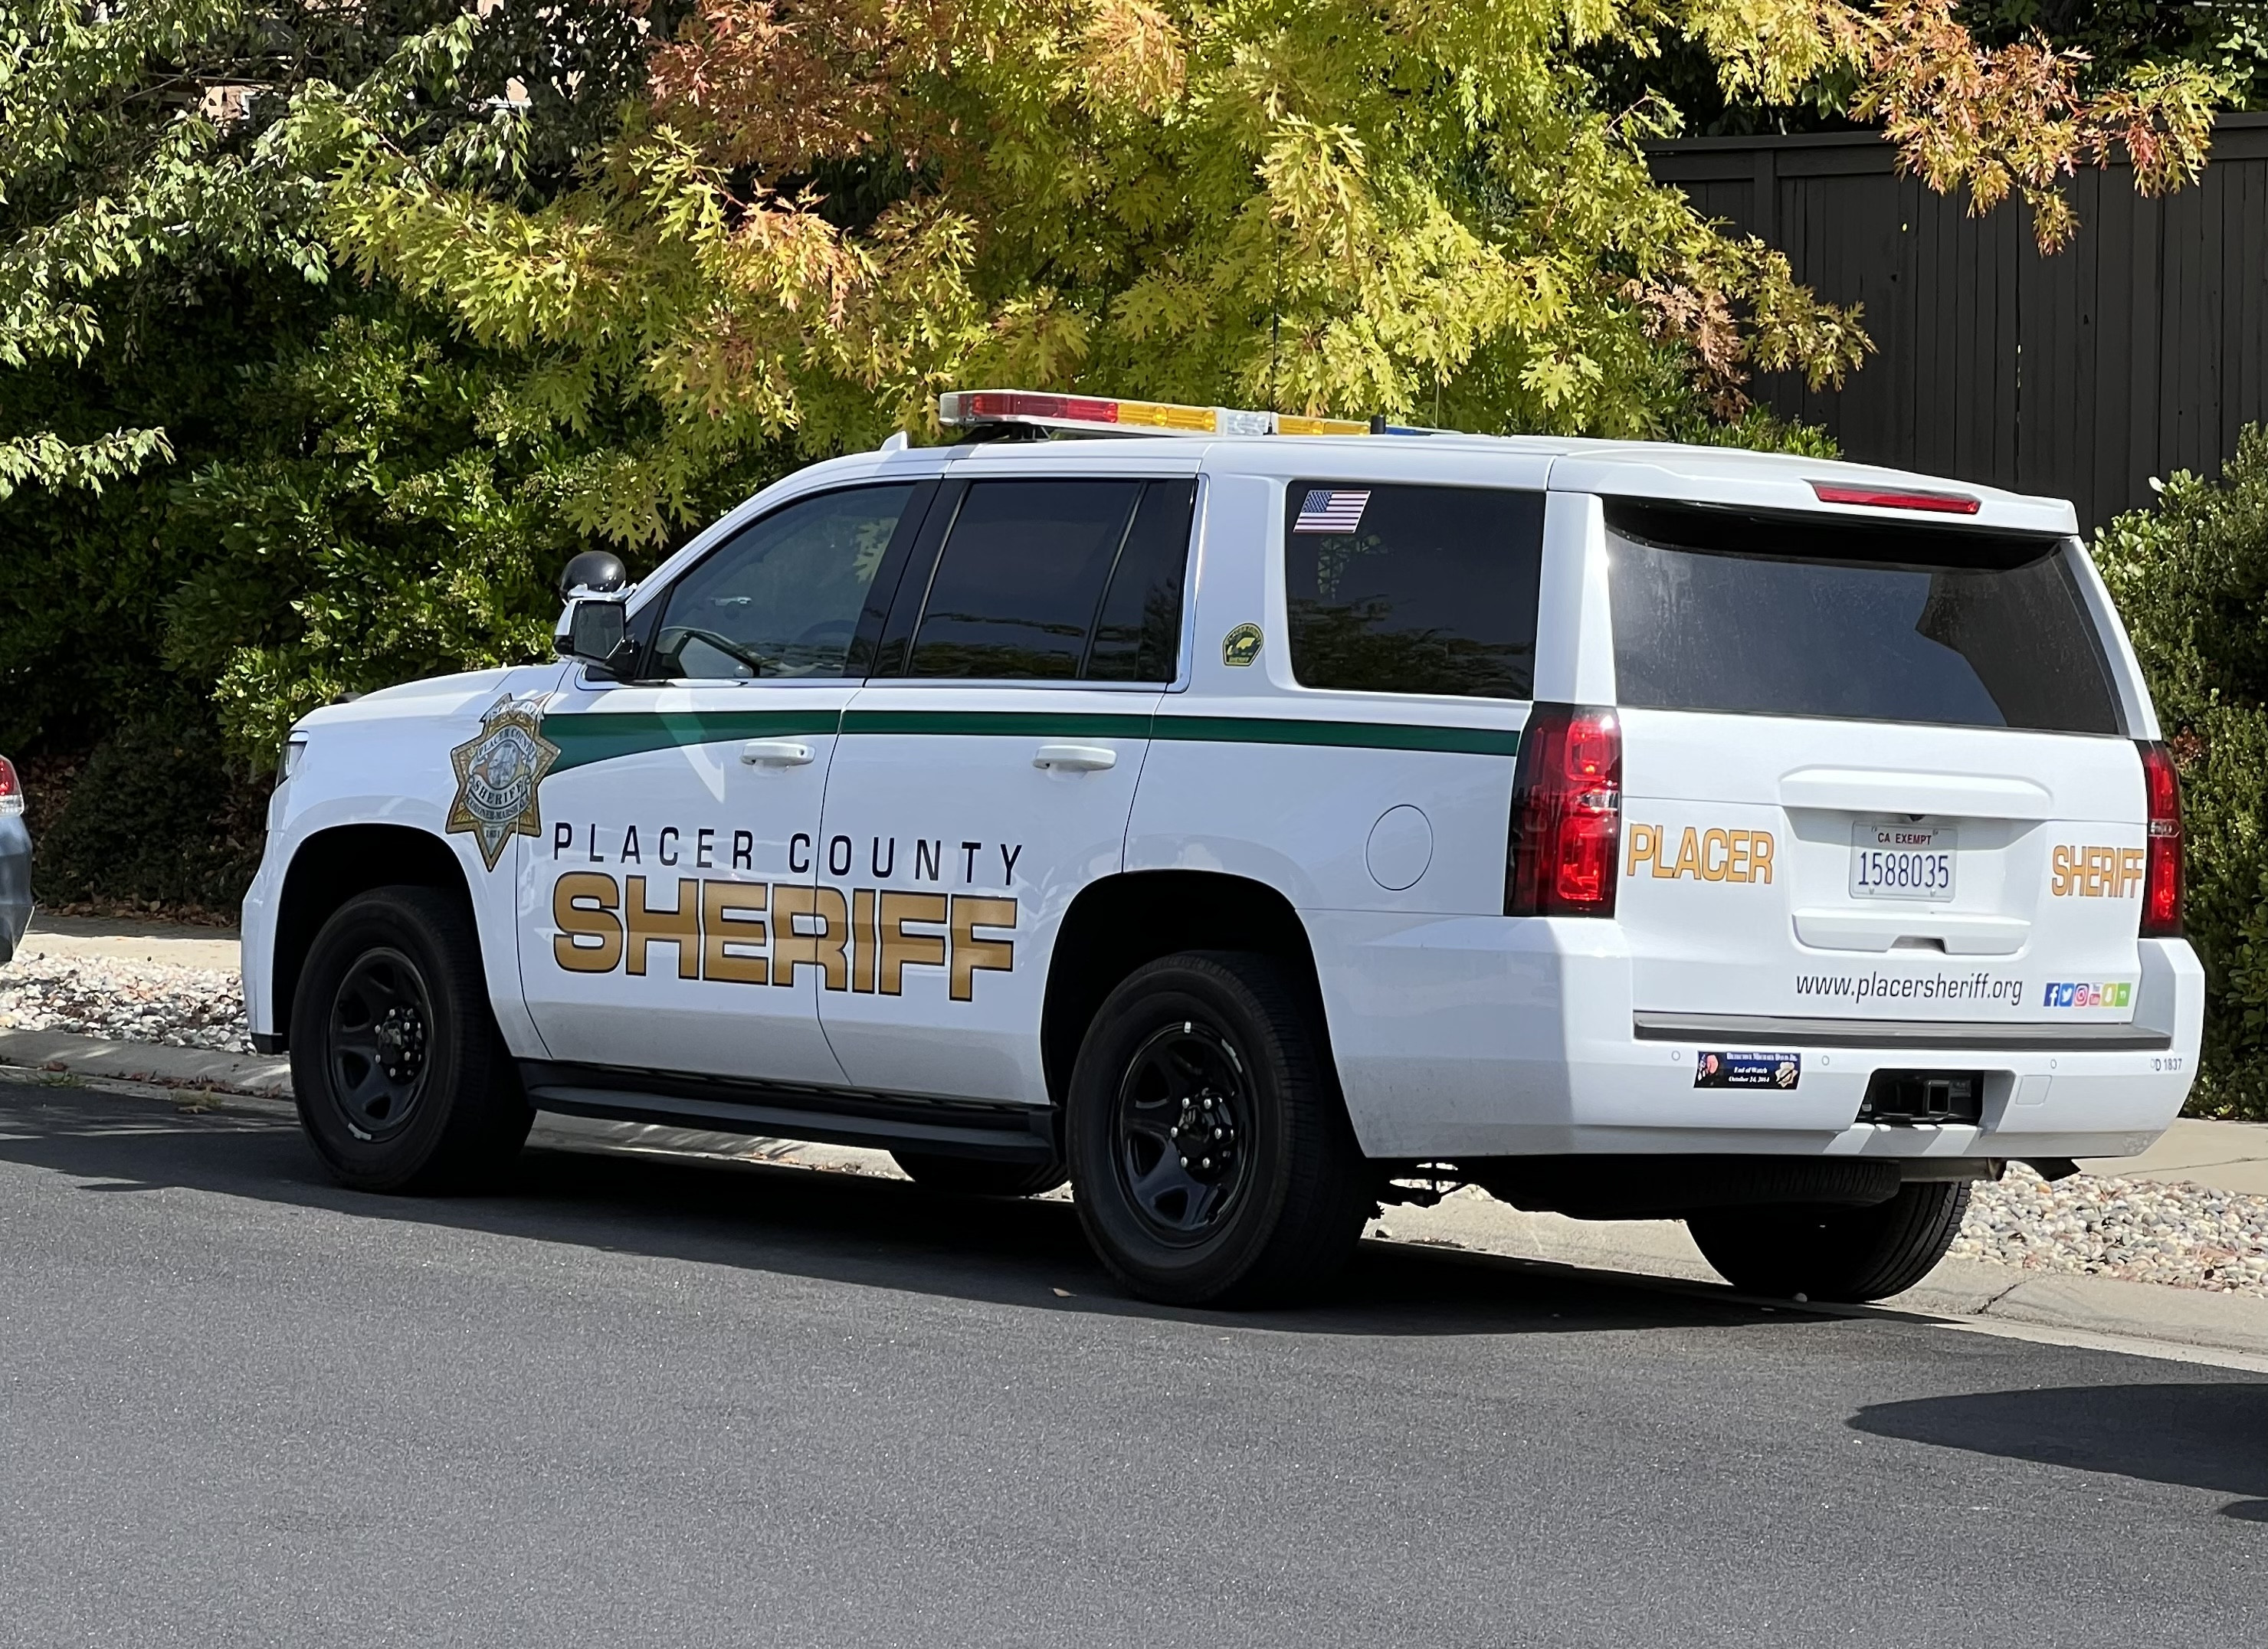 A photo  of Placer County Sheriff
            Cruiser 1837, a 2015-2019 Chevrolet Tahoe             taken by @riemergencyvehicles